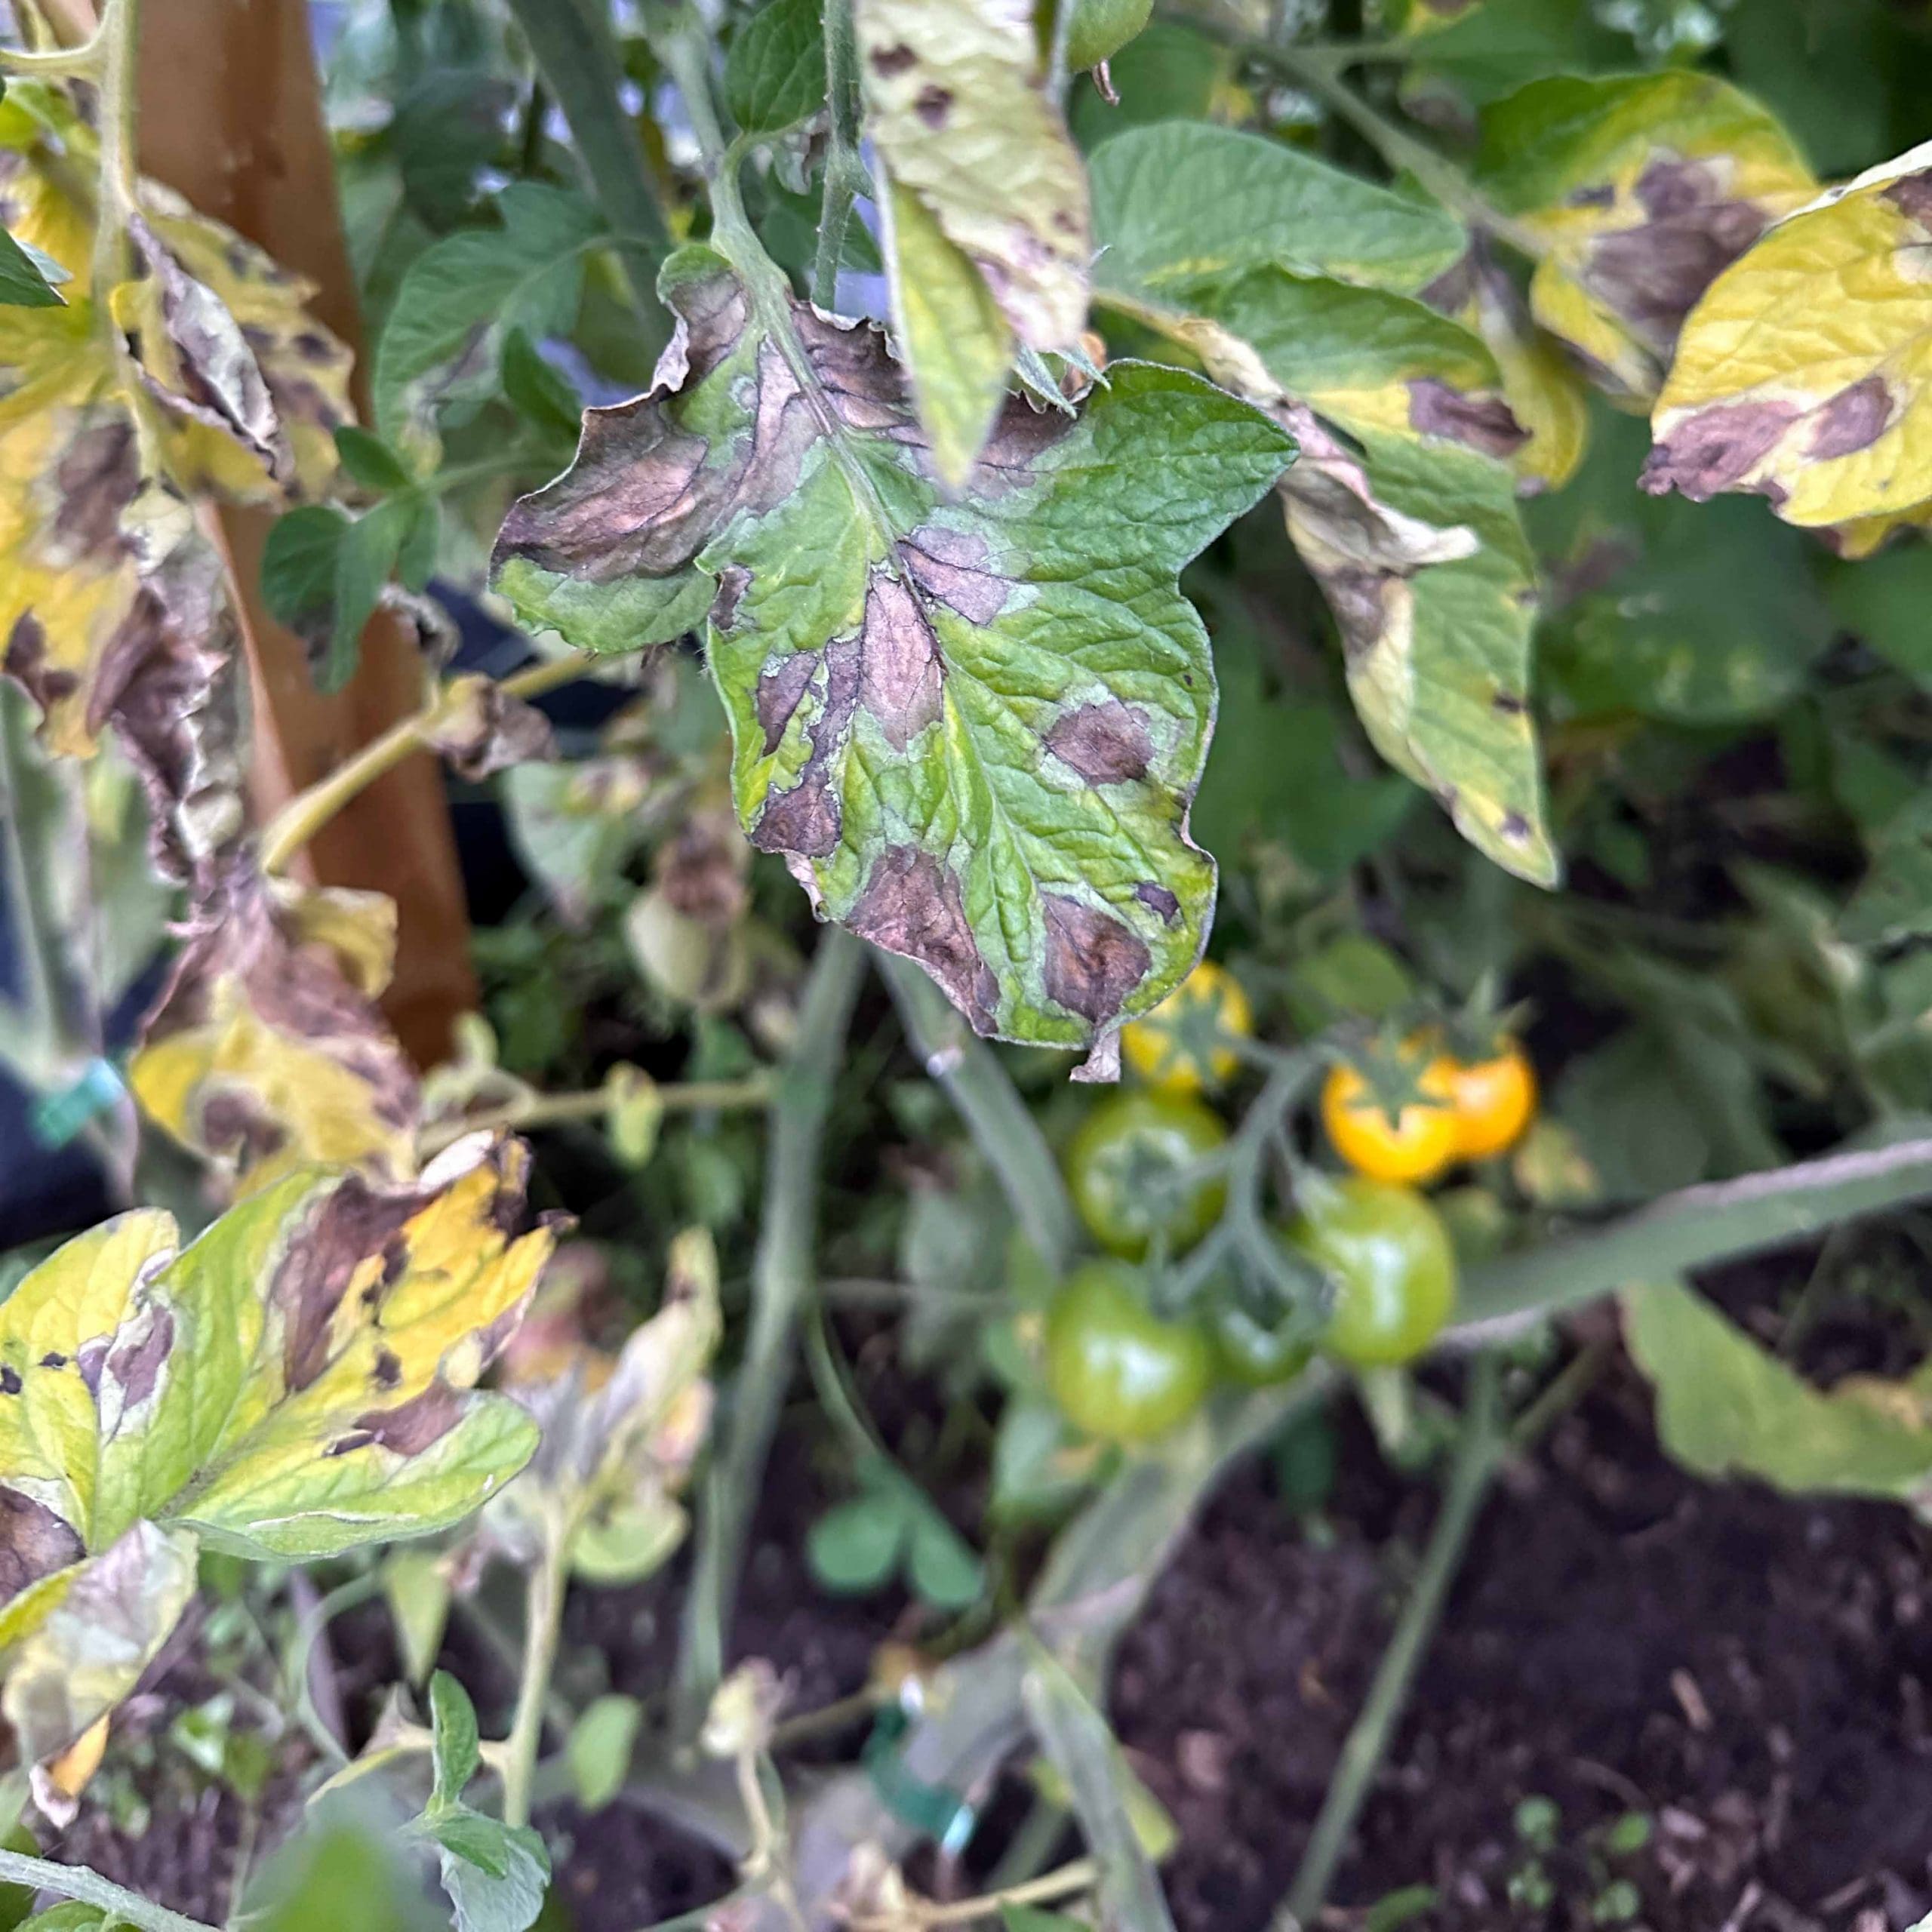 tomato blight infection shown as brown lesions on leaves